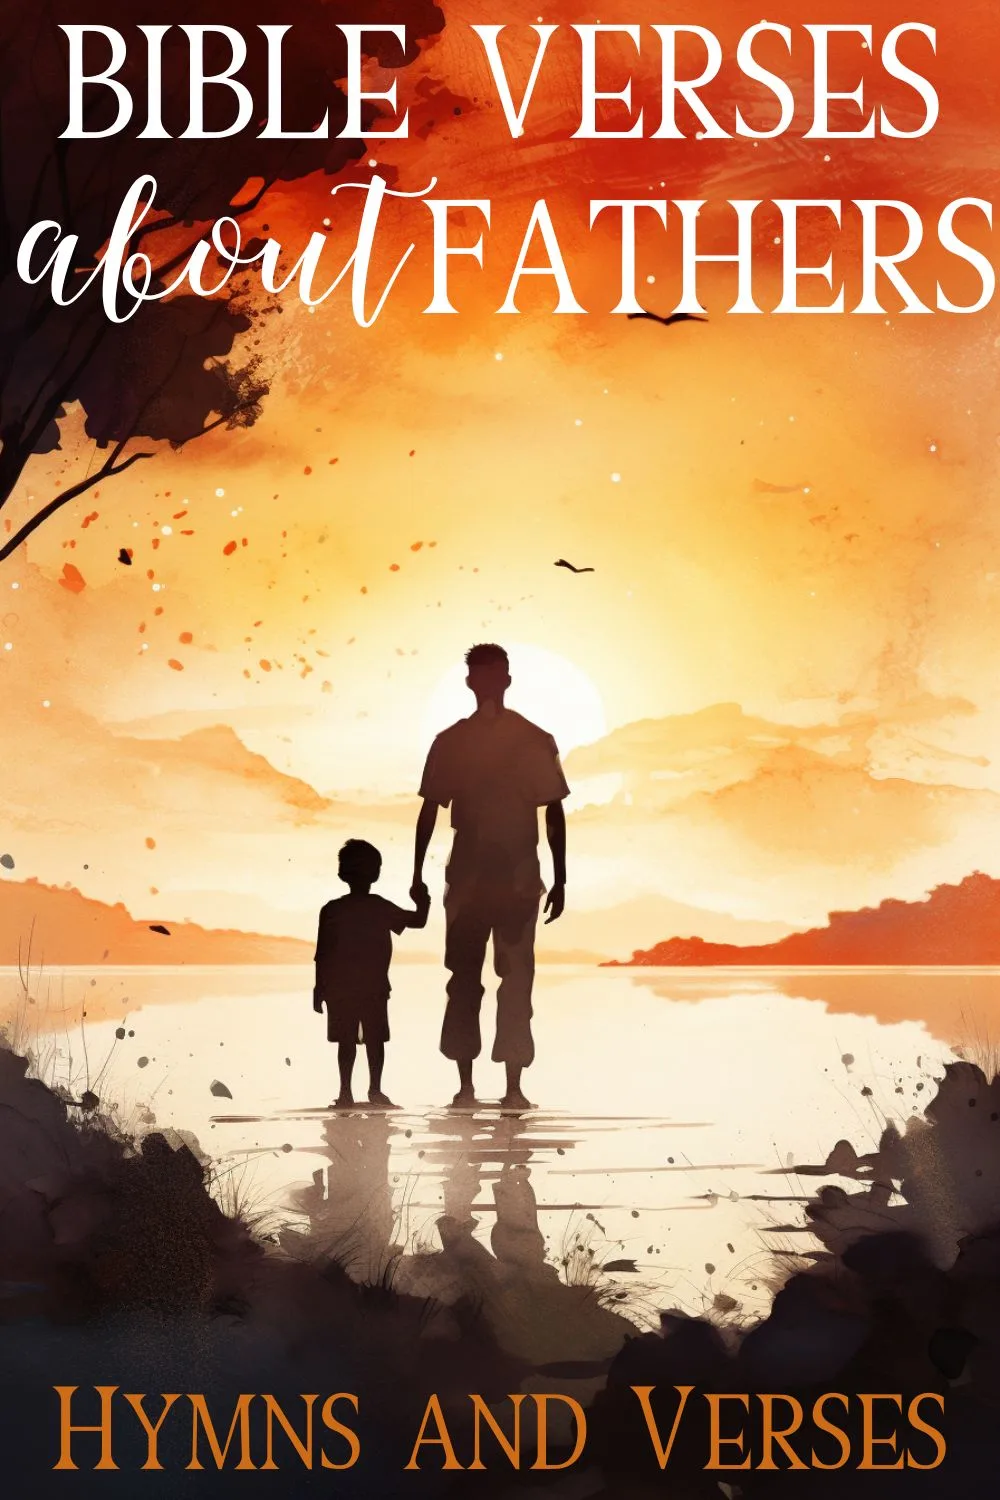 Pin images for Bible verses about fathers - features a father and sun walking into a sunset